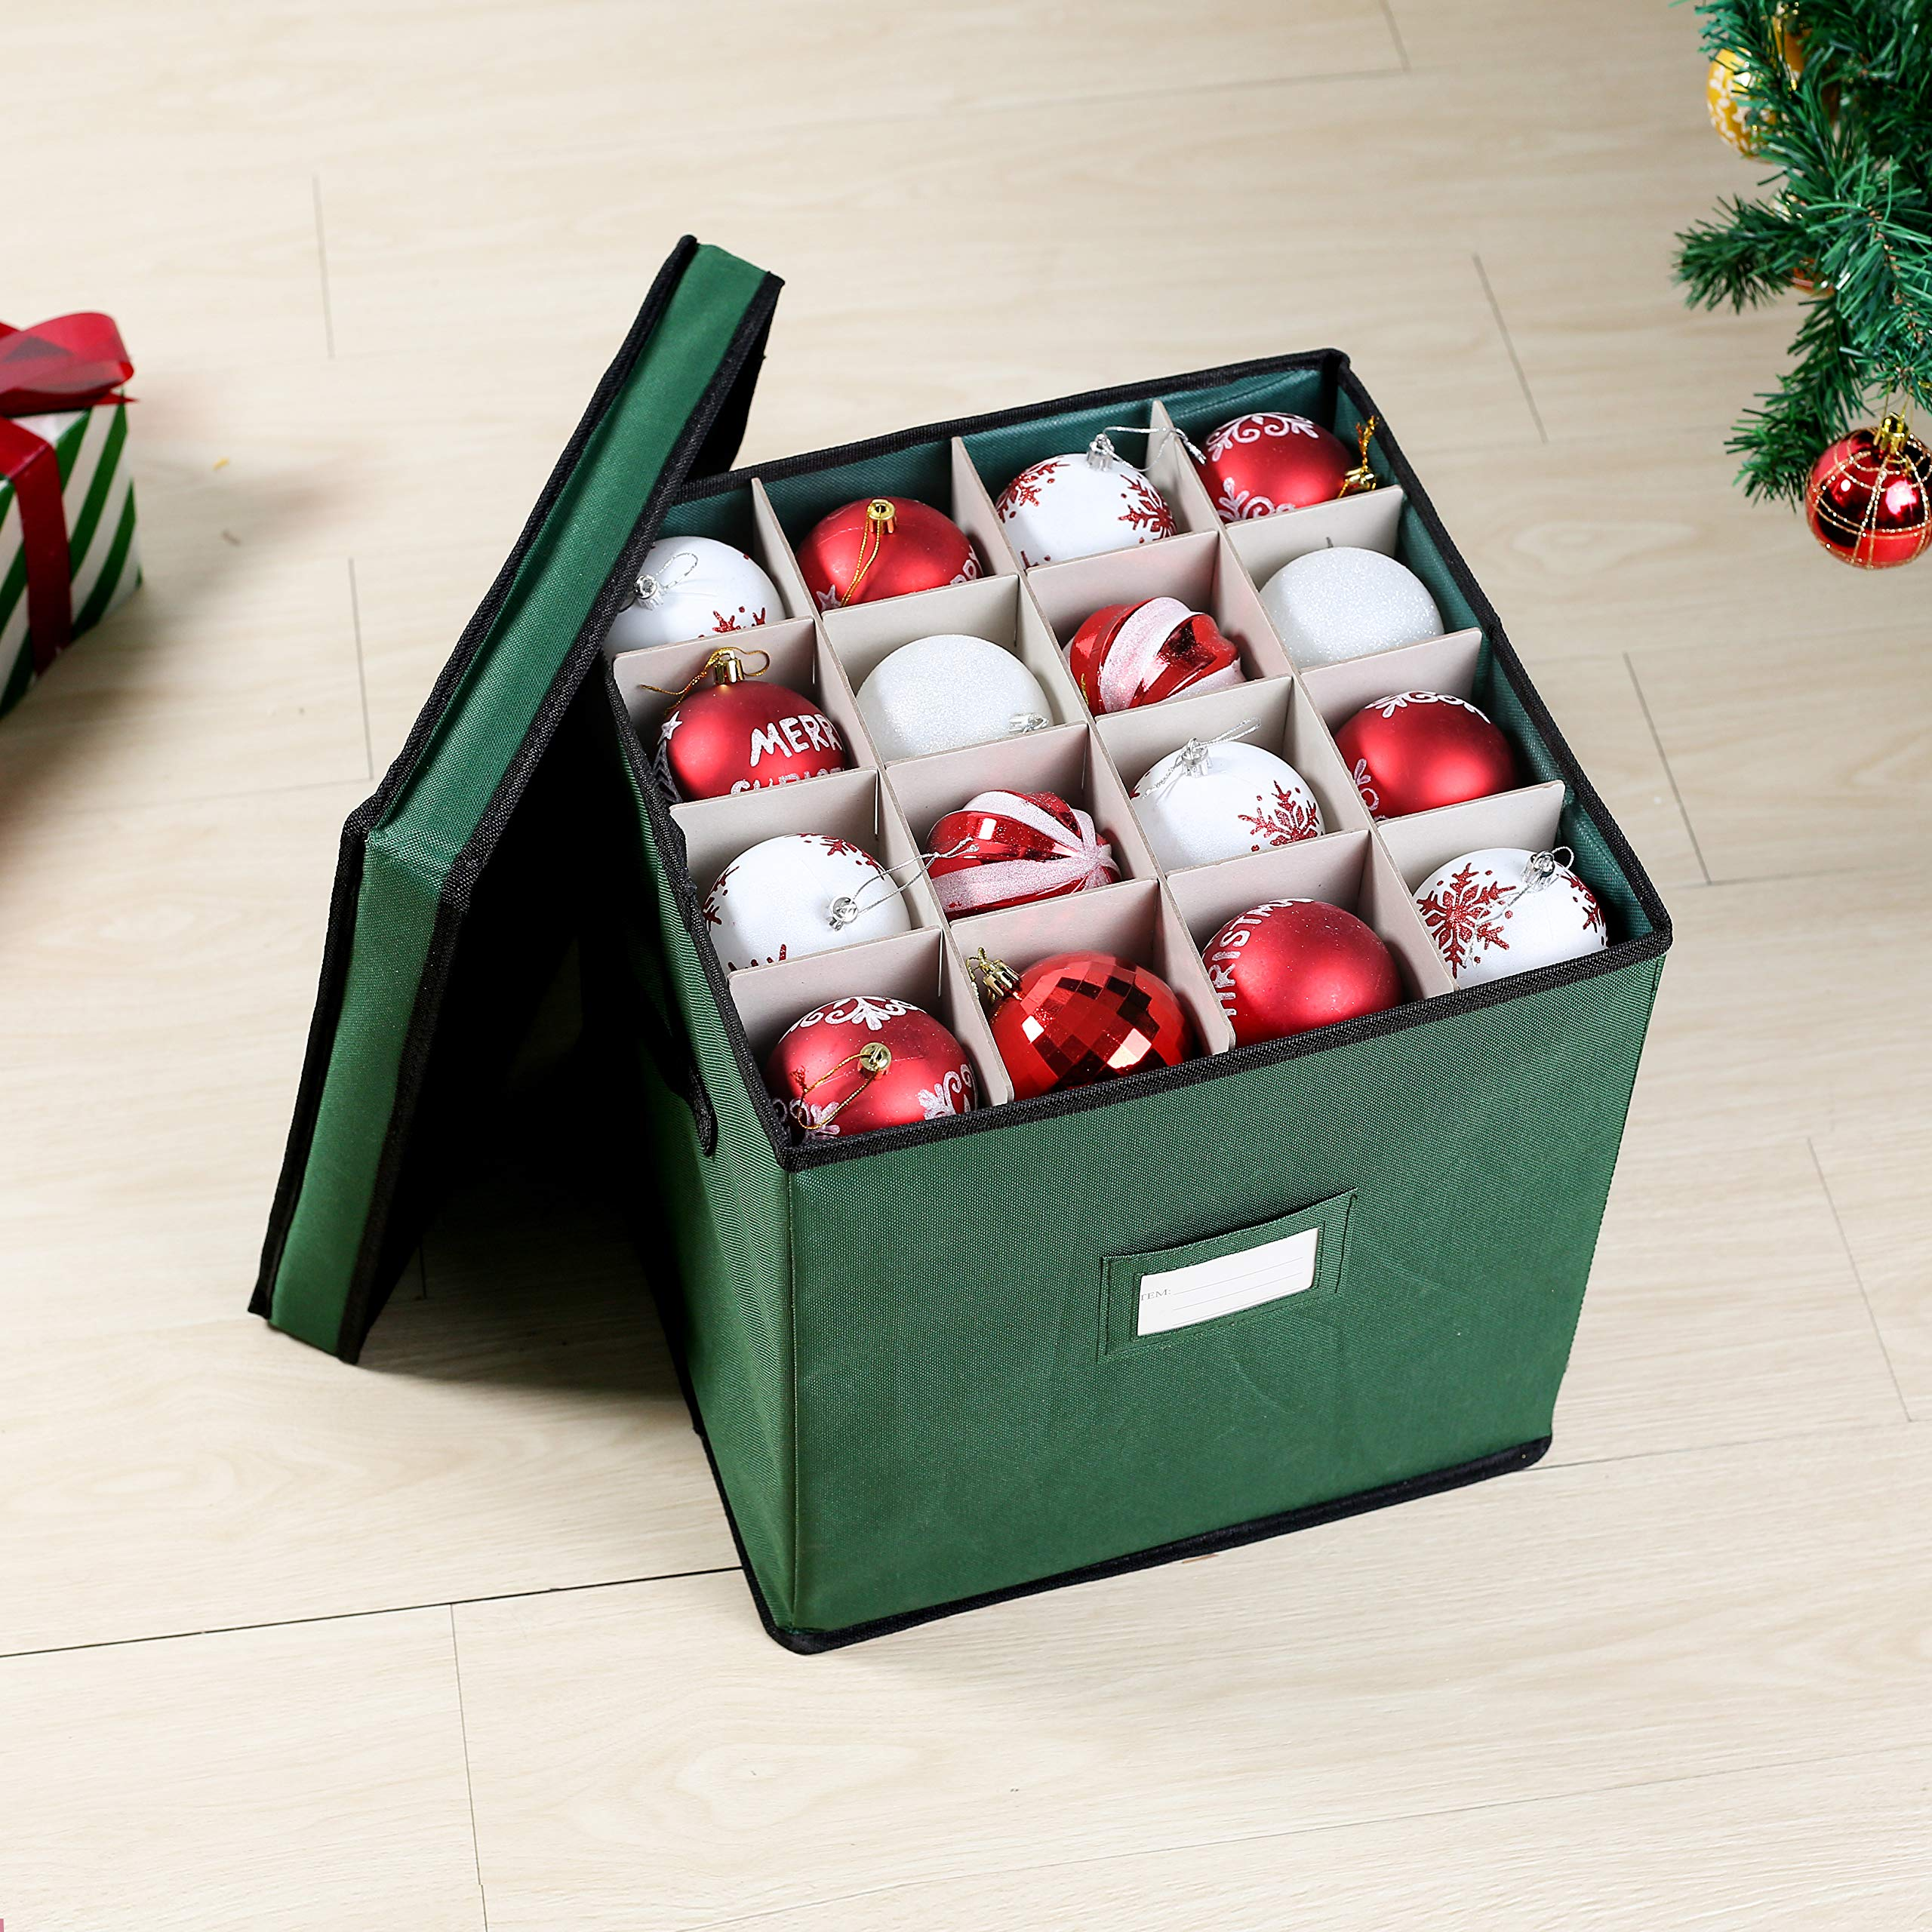 Joiedomi Christmas Ornament Storage Box with Adjustable Dividers, Hold Up  to 64 Ornaments Balls & Christmas Accessories, Oxford Holiday Ornament  Storage Container with Zippered Closure, Two Handles & Card Slot, Storage  Container